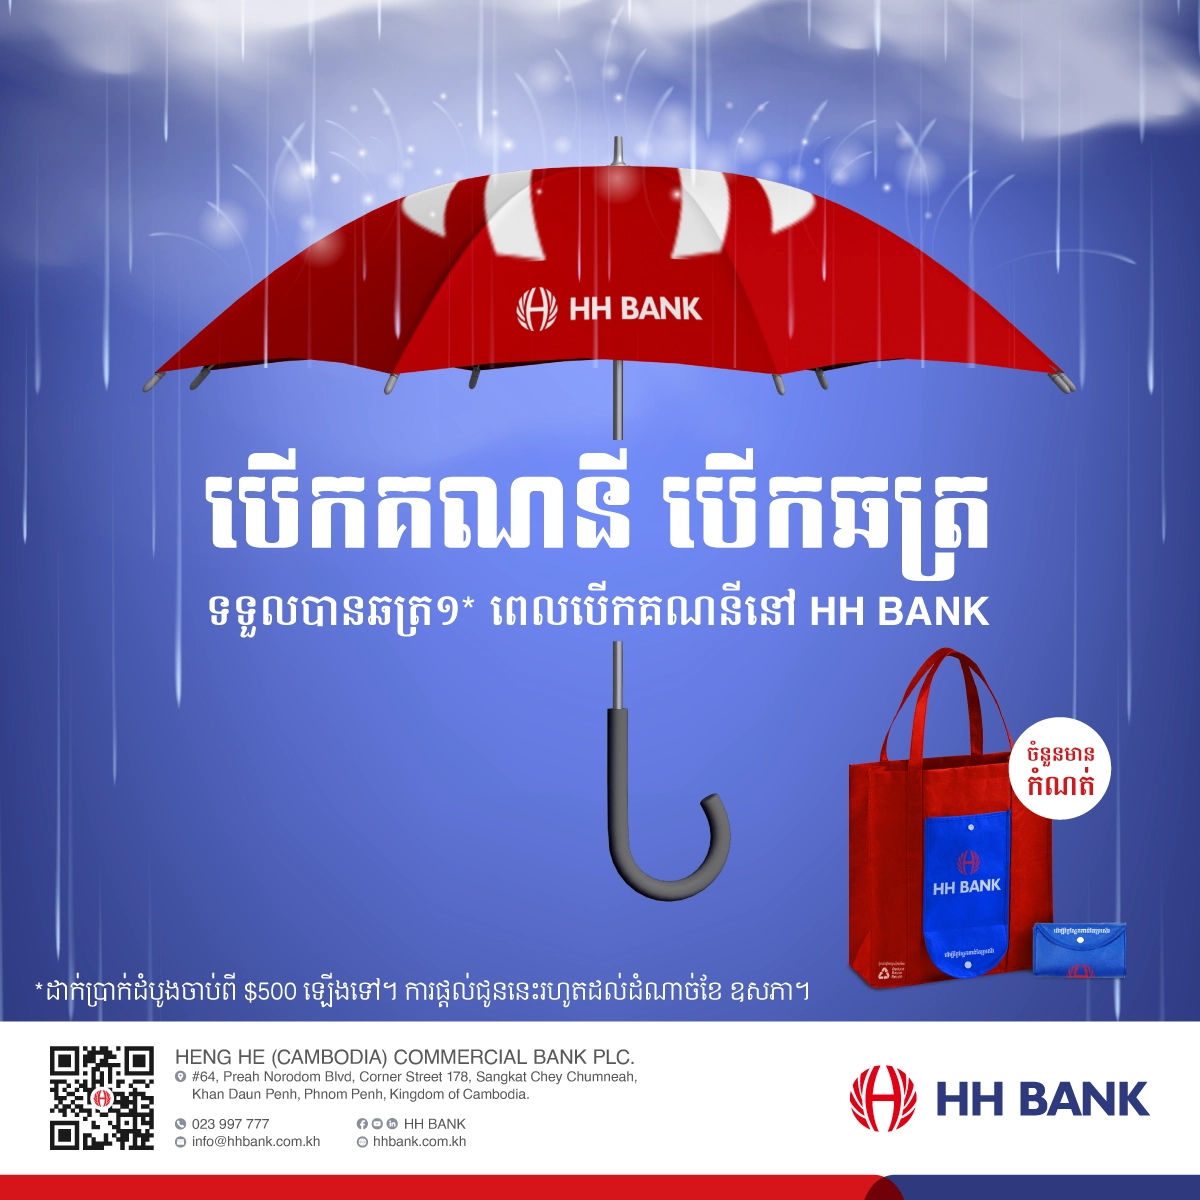 Open a bank account you will get an umbrella and eco bag immediately from HH BANK